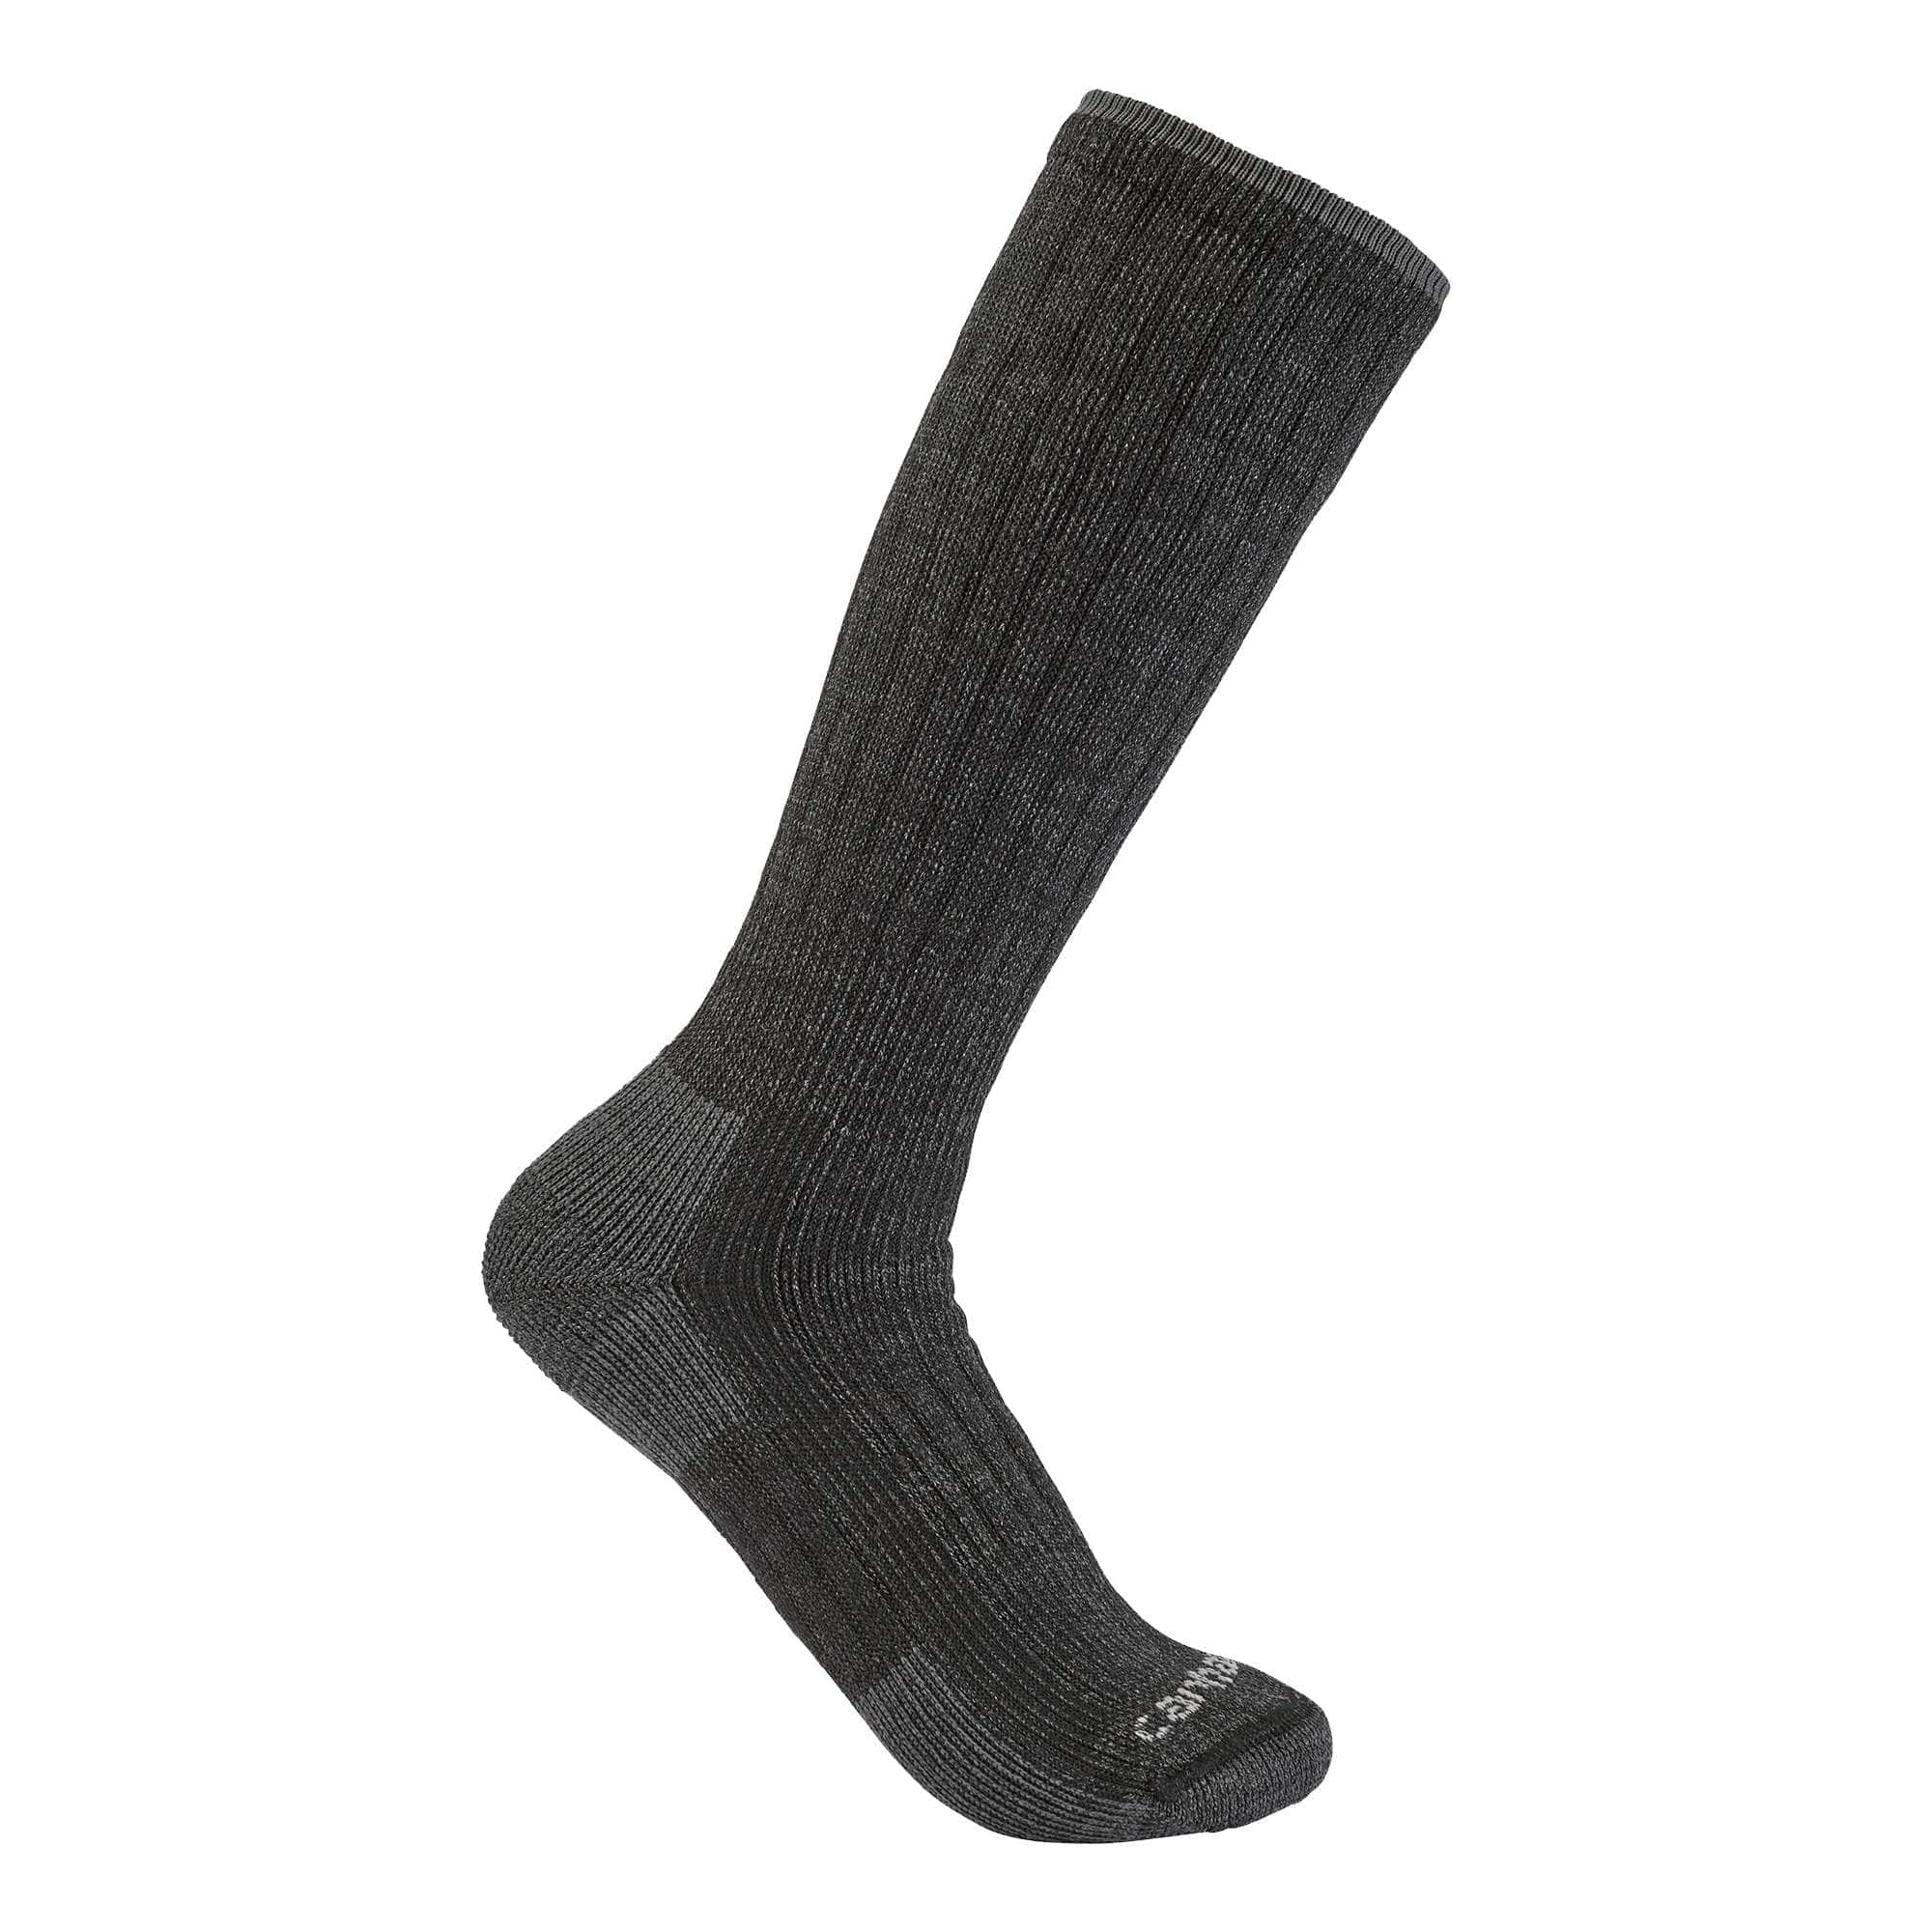 Midweight Synthetic-Wool Blend Boot Sock | coming-soon-4 | Carhartt